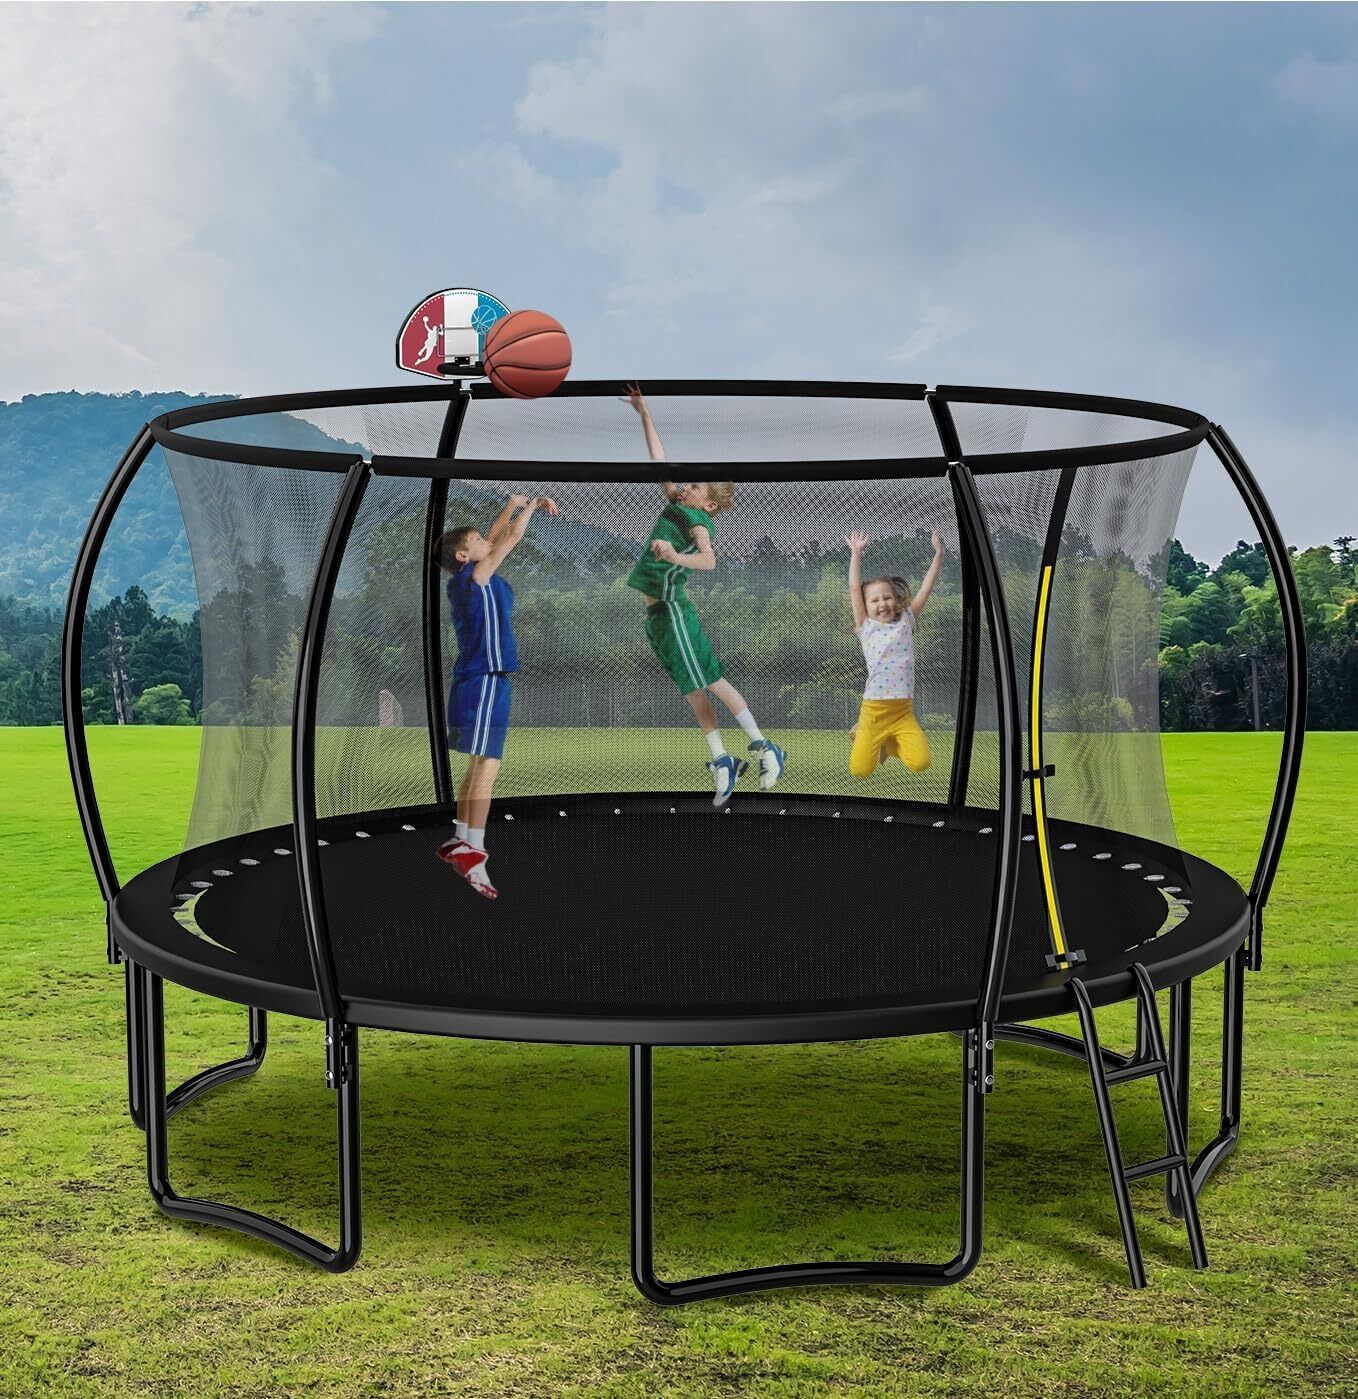 Trampoline Set with Swing, Slide, Basketball Hoop,Sports Fitness Trampolines E unbrand Does not apply